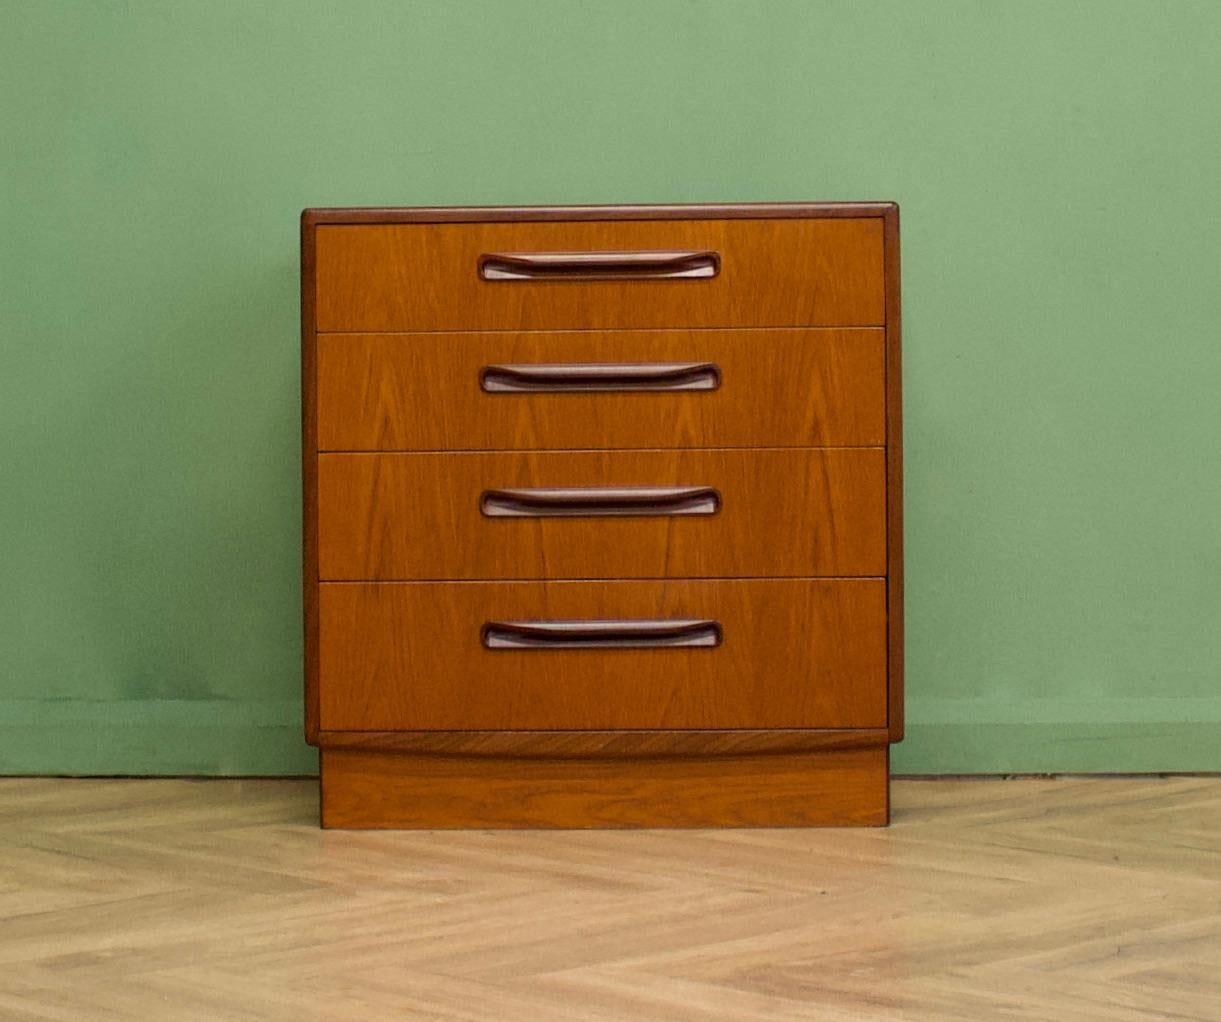 A teak chest of drawers from G Plan from the Fresco range
Featuring 4 drawers